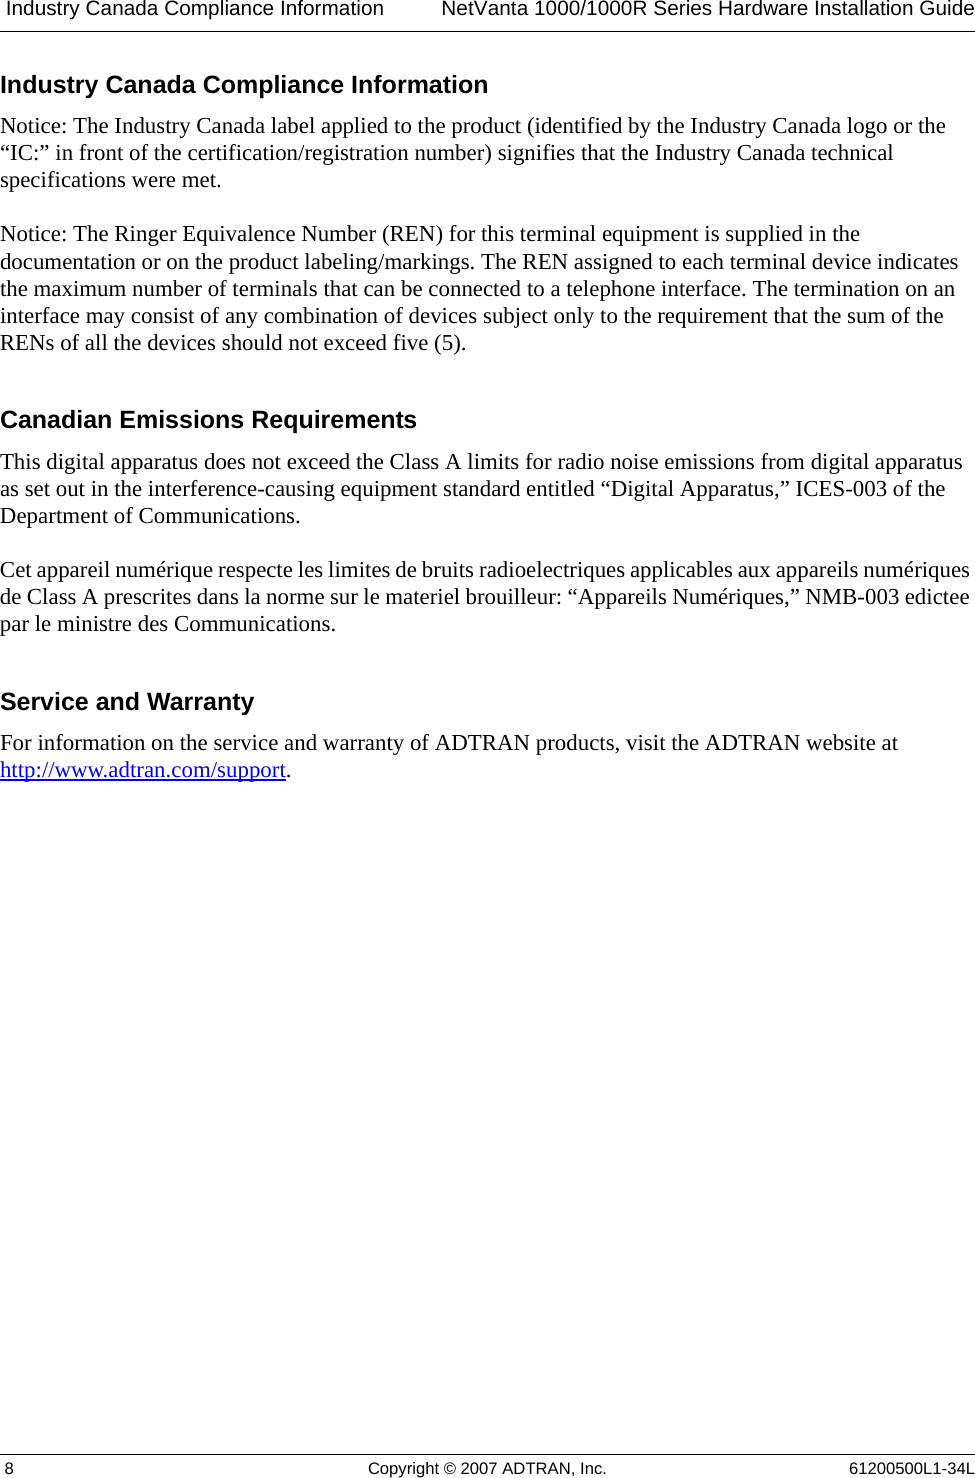  Industry Canada Compliance Information NetVanta 1000/1000R Series Hardware Installation Guide 8 Copyright © 2007 ADTRAN, Inc. 61200500L1-34LIndustry Canada Compliance InformationNotice: The Industry Canada label applied to the product (identified by the Industry Canada logo or the “IC:” in front of the certification/registration number) signifies that the Industry Canada technical specifications were met.Notice: The Ringer Equivalence Number (REN) for this terminal equipment is supplied in the documentation or on the product labeling/markings. The REN assigned to each terminal device indicates the maximum number of terminals that can be connected to a telephone interface. The termination on an interface may consist of any combination of devices subject only to the requirement that the sum of the RENs of all the devices should not exceed five (5).Canadian Emissions RequirementsThis digital apparatus does not exceed the Class A limits for radio noise emissions from digital apparatus as set out in the interference-causing equipment standard entitled “Digital Apparatus,” ICES-003 of the Department of Communications.Cet appareil numérique respecte les limites de bruits radioelectriques applicables aux appareils numériques de Class A prescrites dans la norme sur le materiel brouilleur: “Appareils Numériques,” NMB-003 edictee par le ministre des Communications.Service and WarrantyFor information on the service and warranty of ADTRAN products, visit the ADTRAN website at http://www.adtran.com/support.